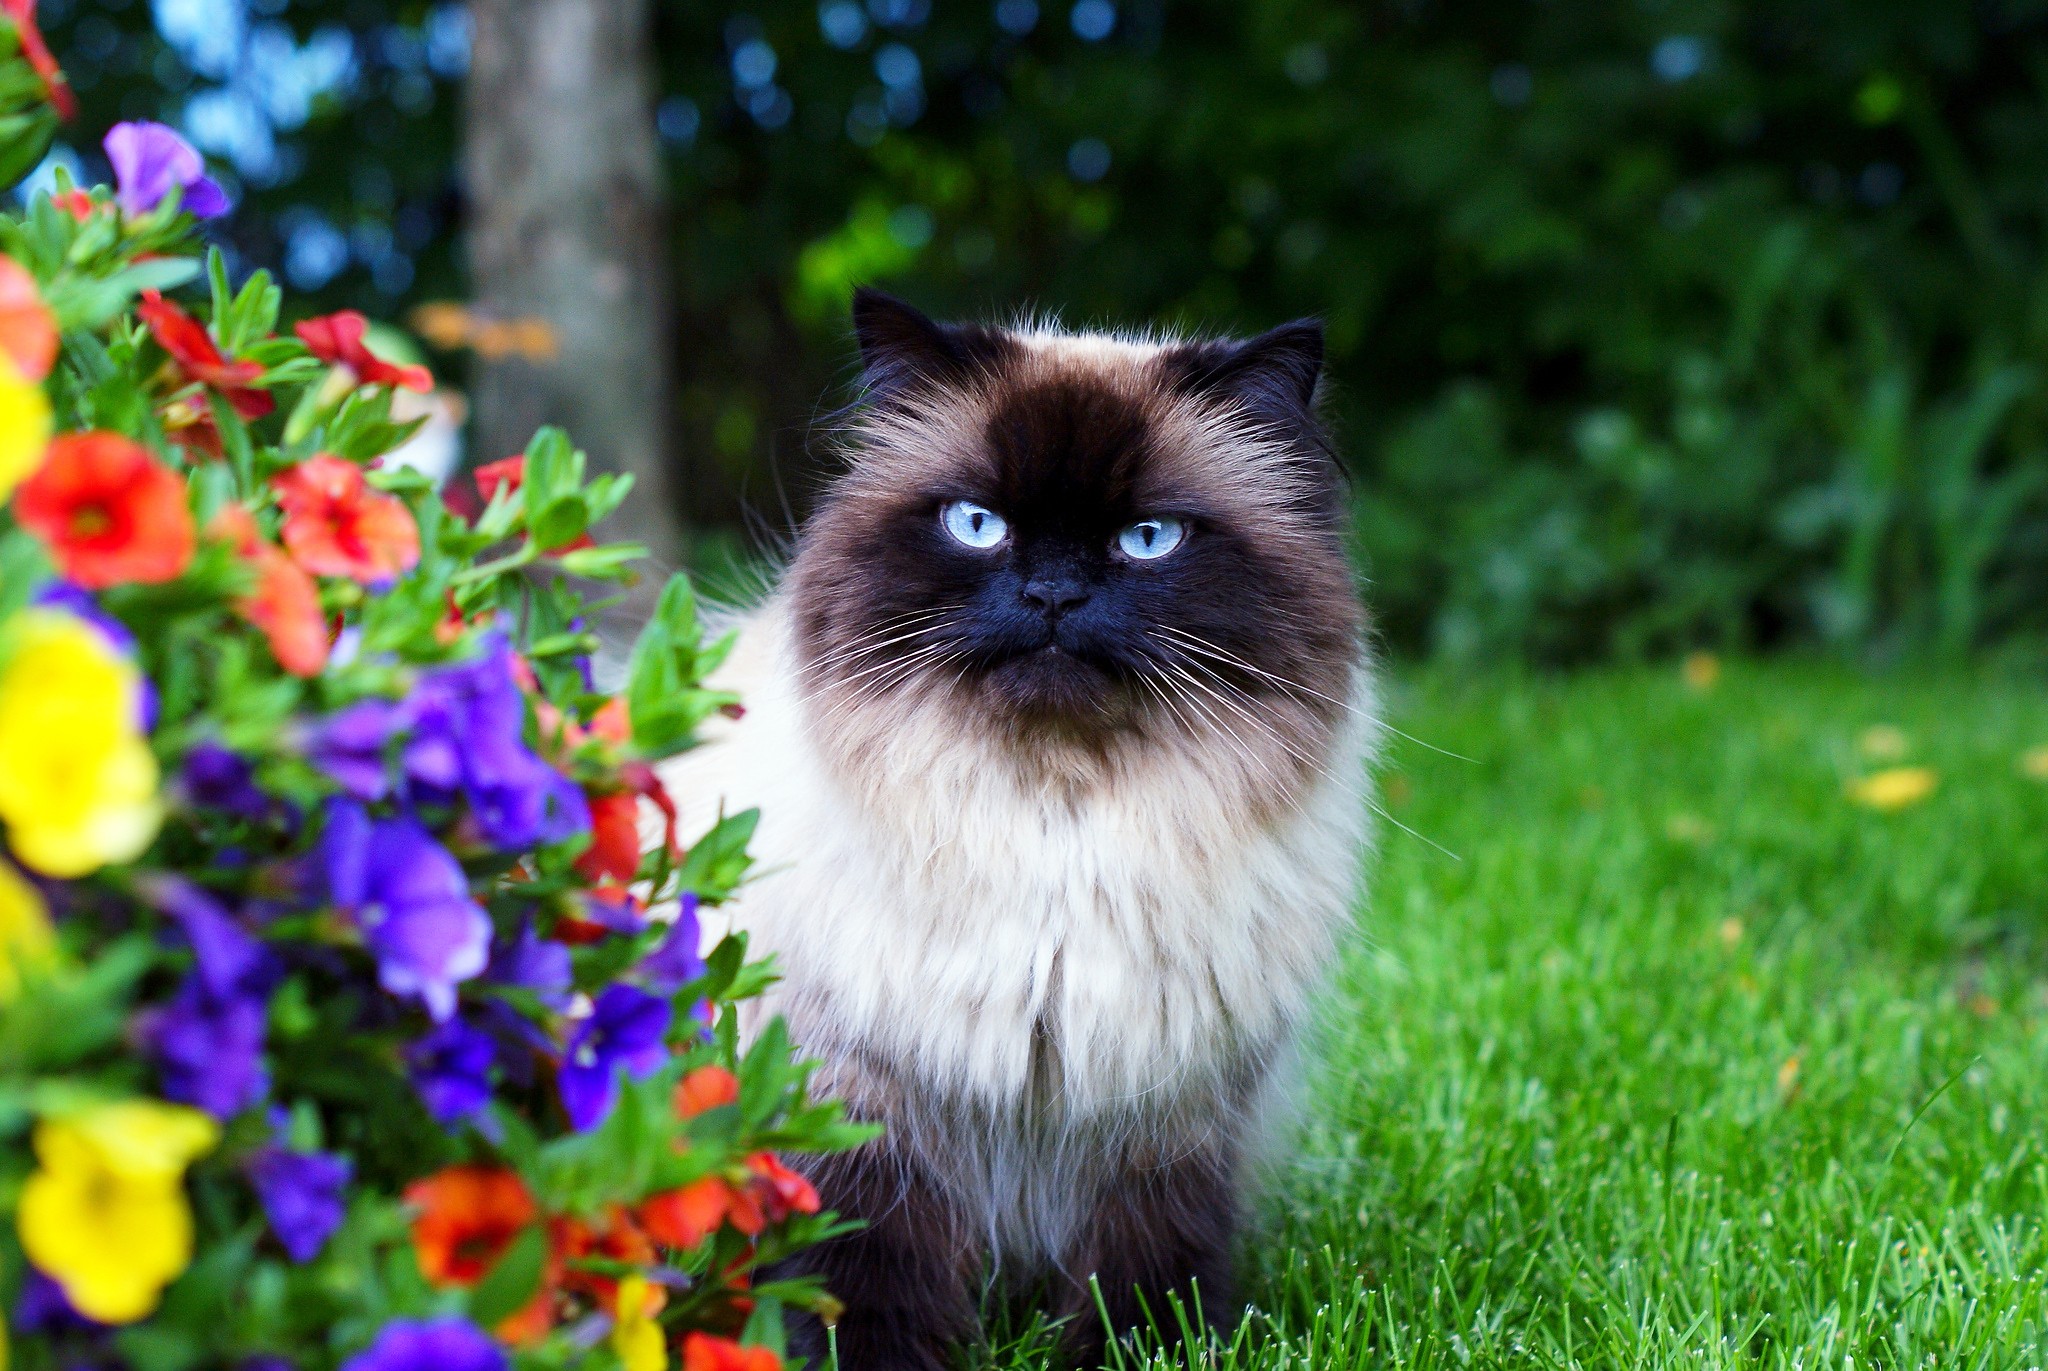 General 2048x1371 animals cats flowers angry mammals outdoors garden